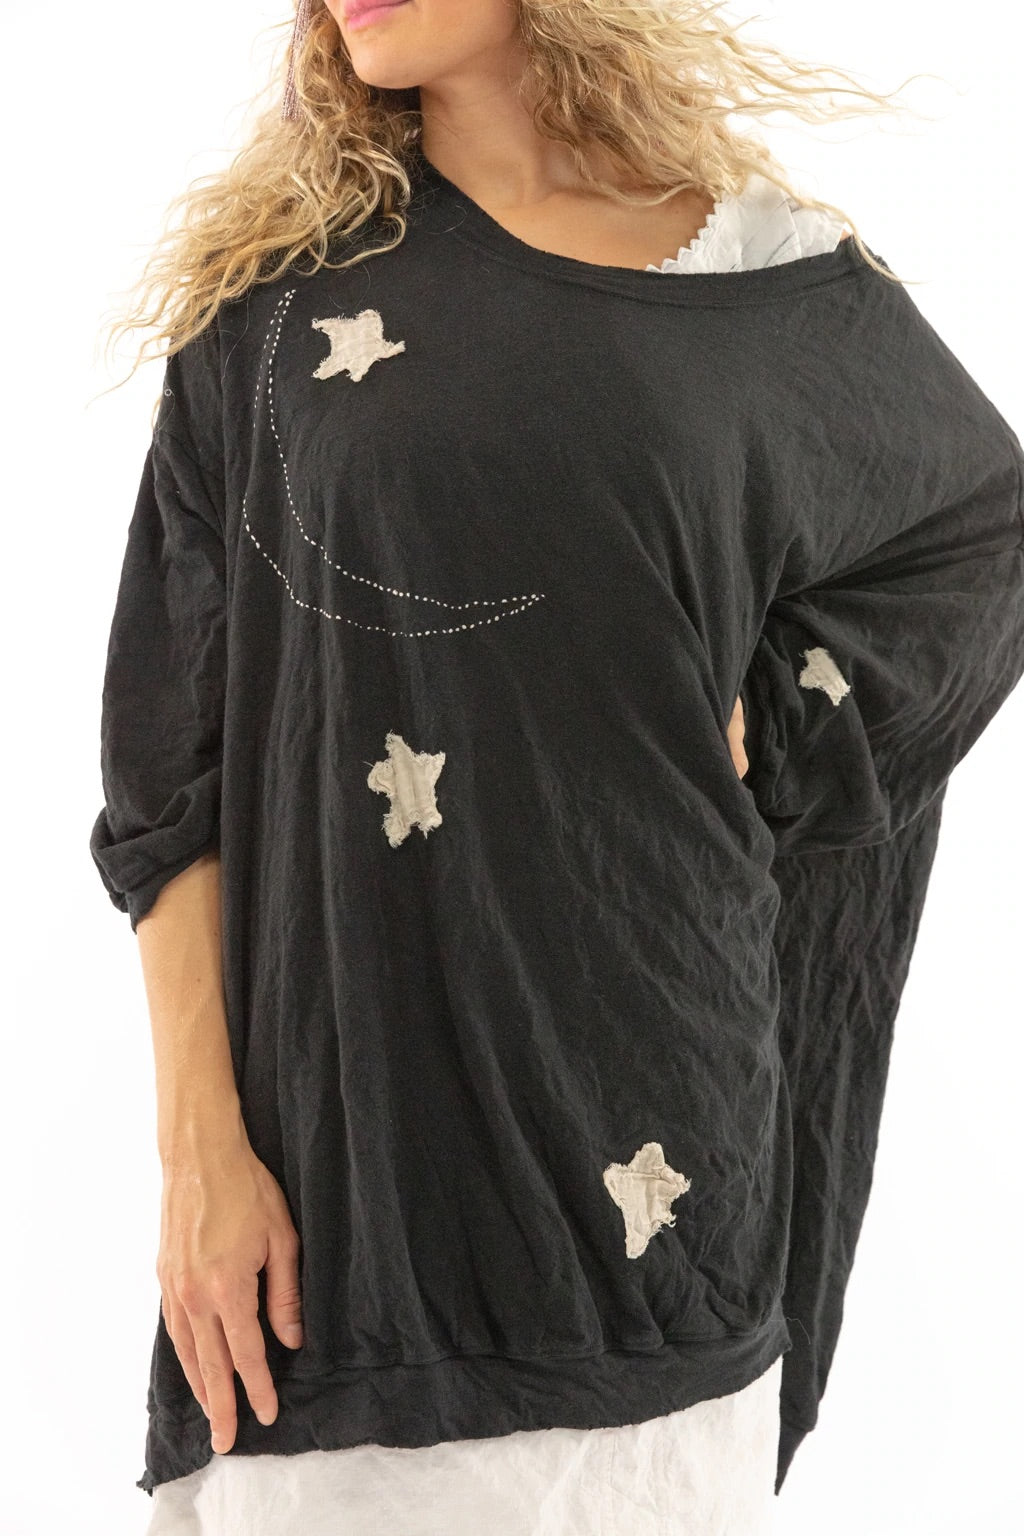 Magnolia pearl oversized Francis T top 1044